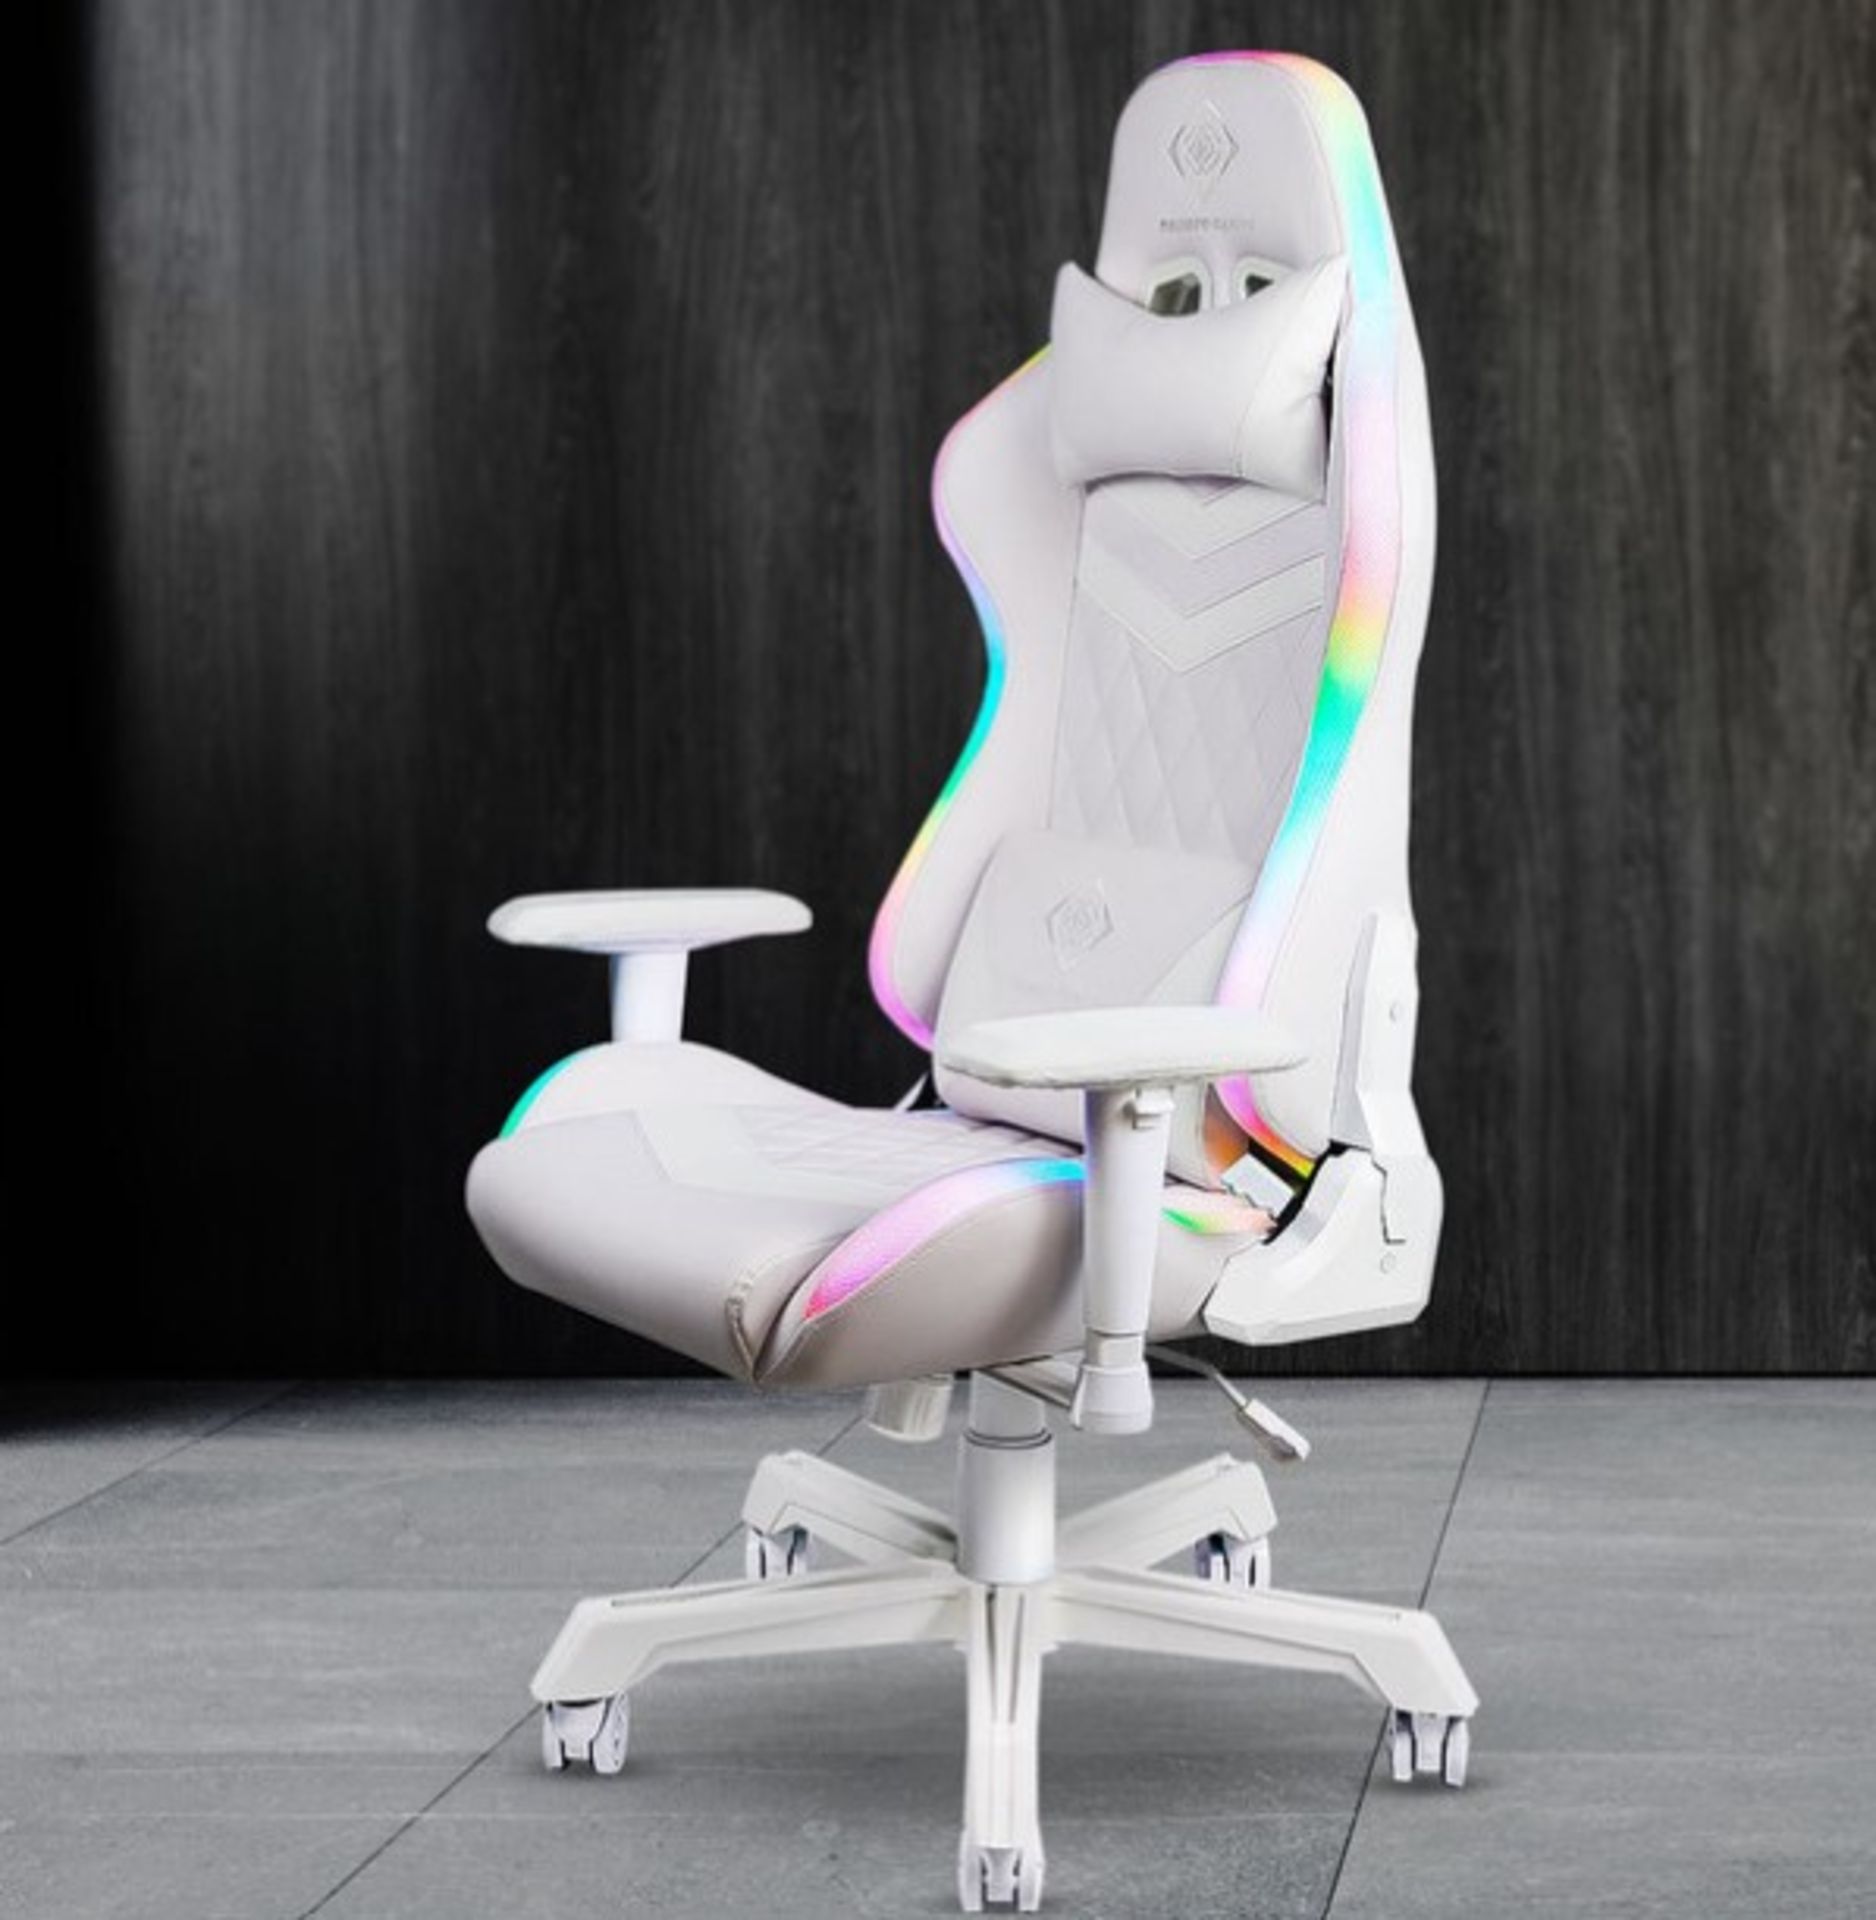 Title: (8/P) RRP £259Deltaco RGB Ergonomic Gaming Chair White332 Colour ModesWipe Clean